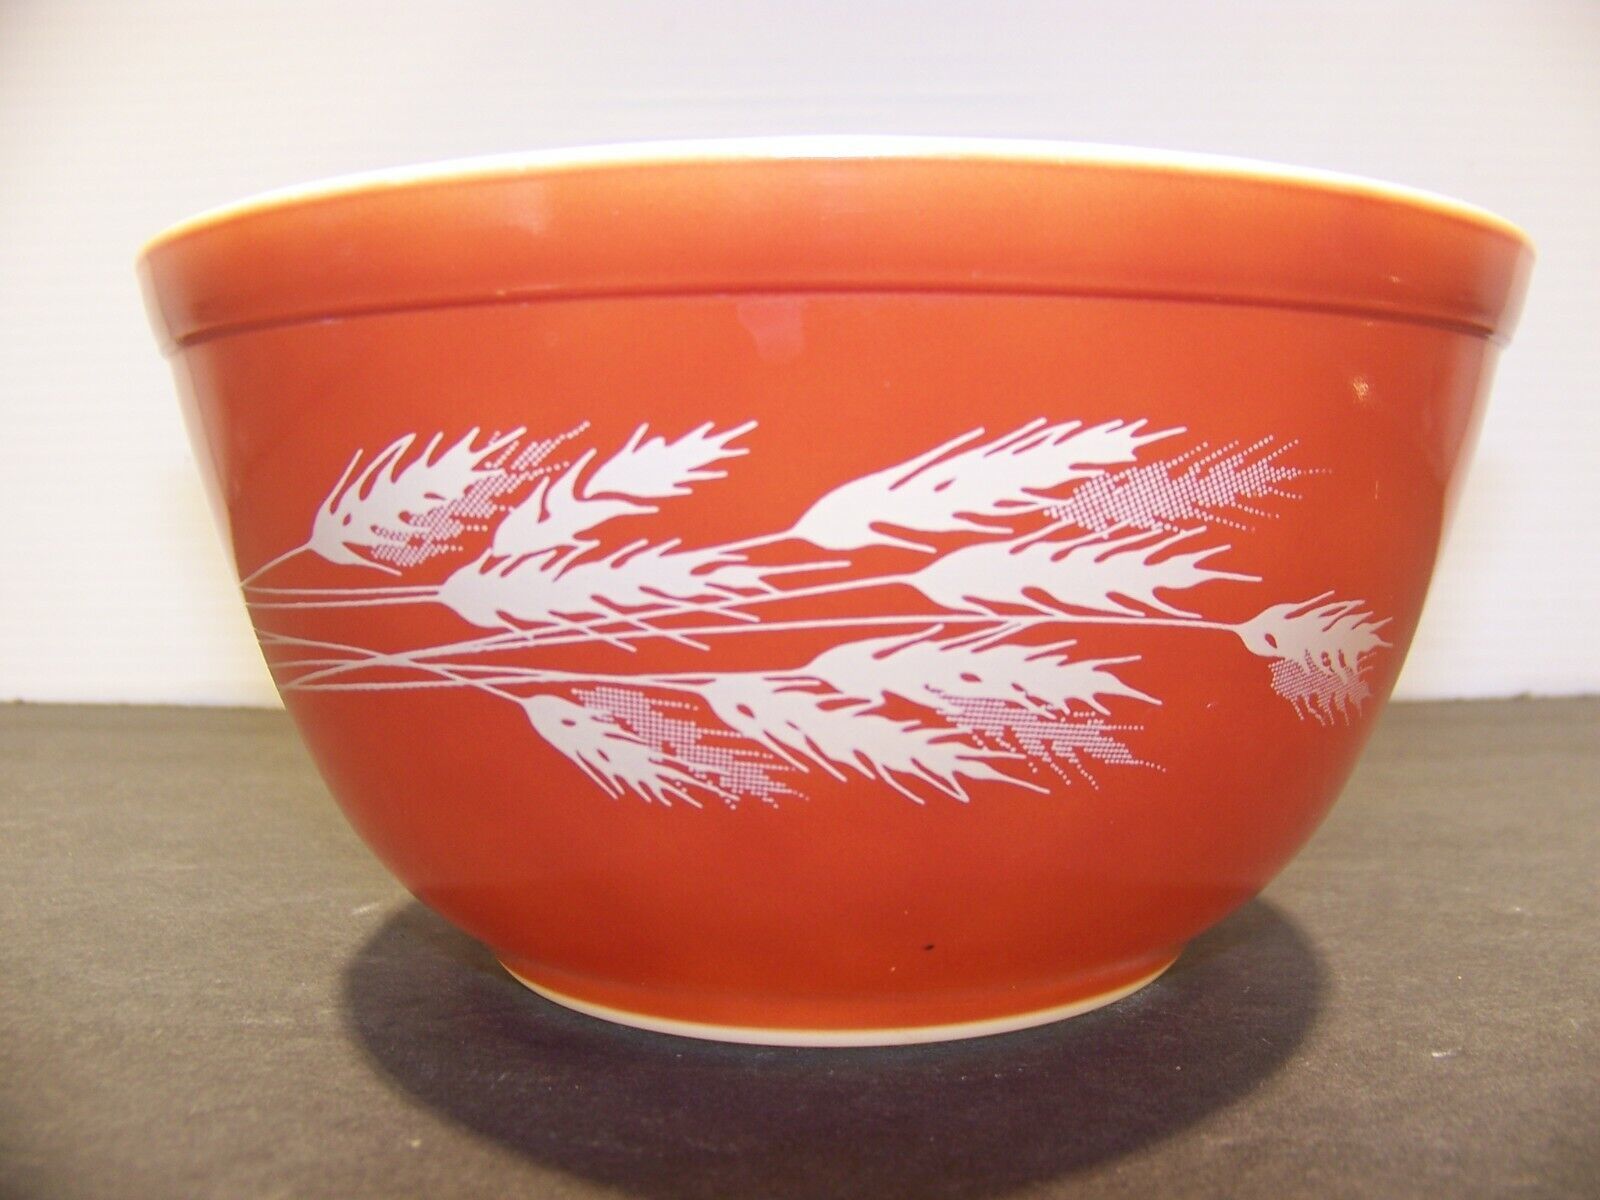 Primary image for Autumn Harvest Pyrex Mixing Bowl 402 1.5L Tan on Rust 1979 - 1986